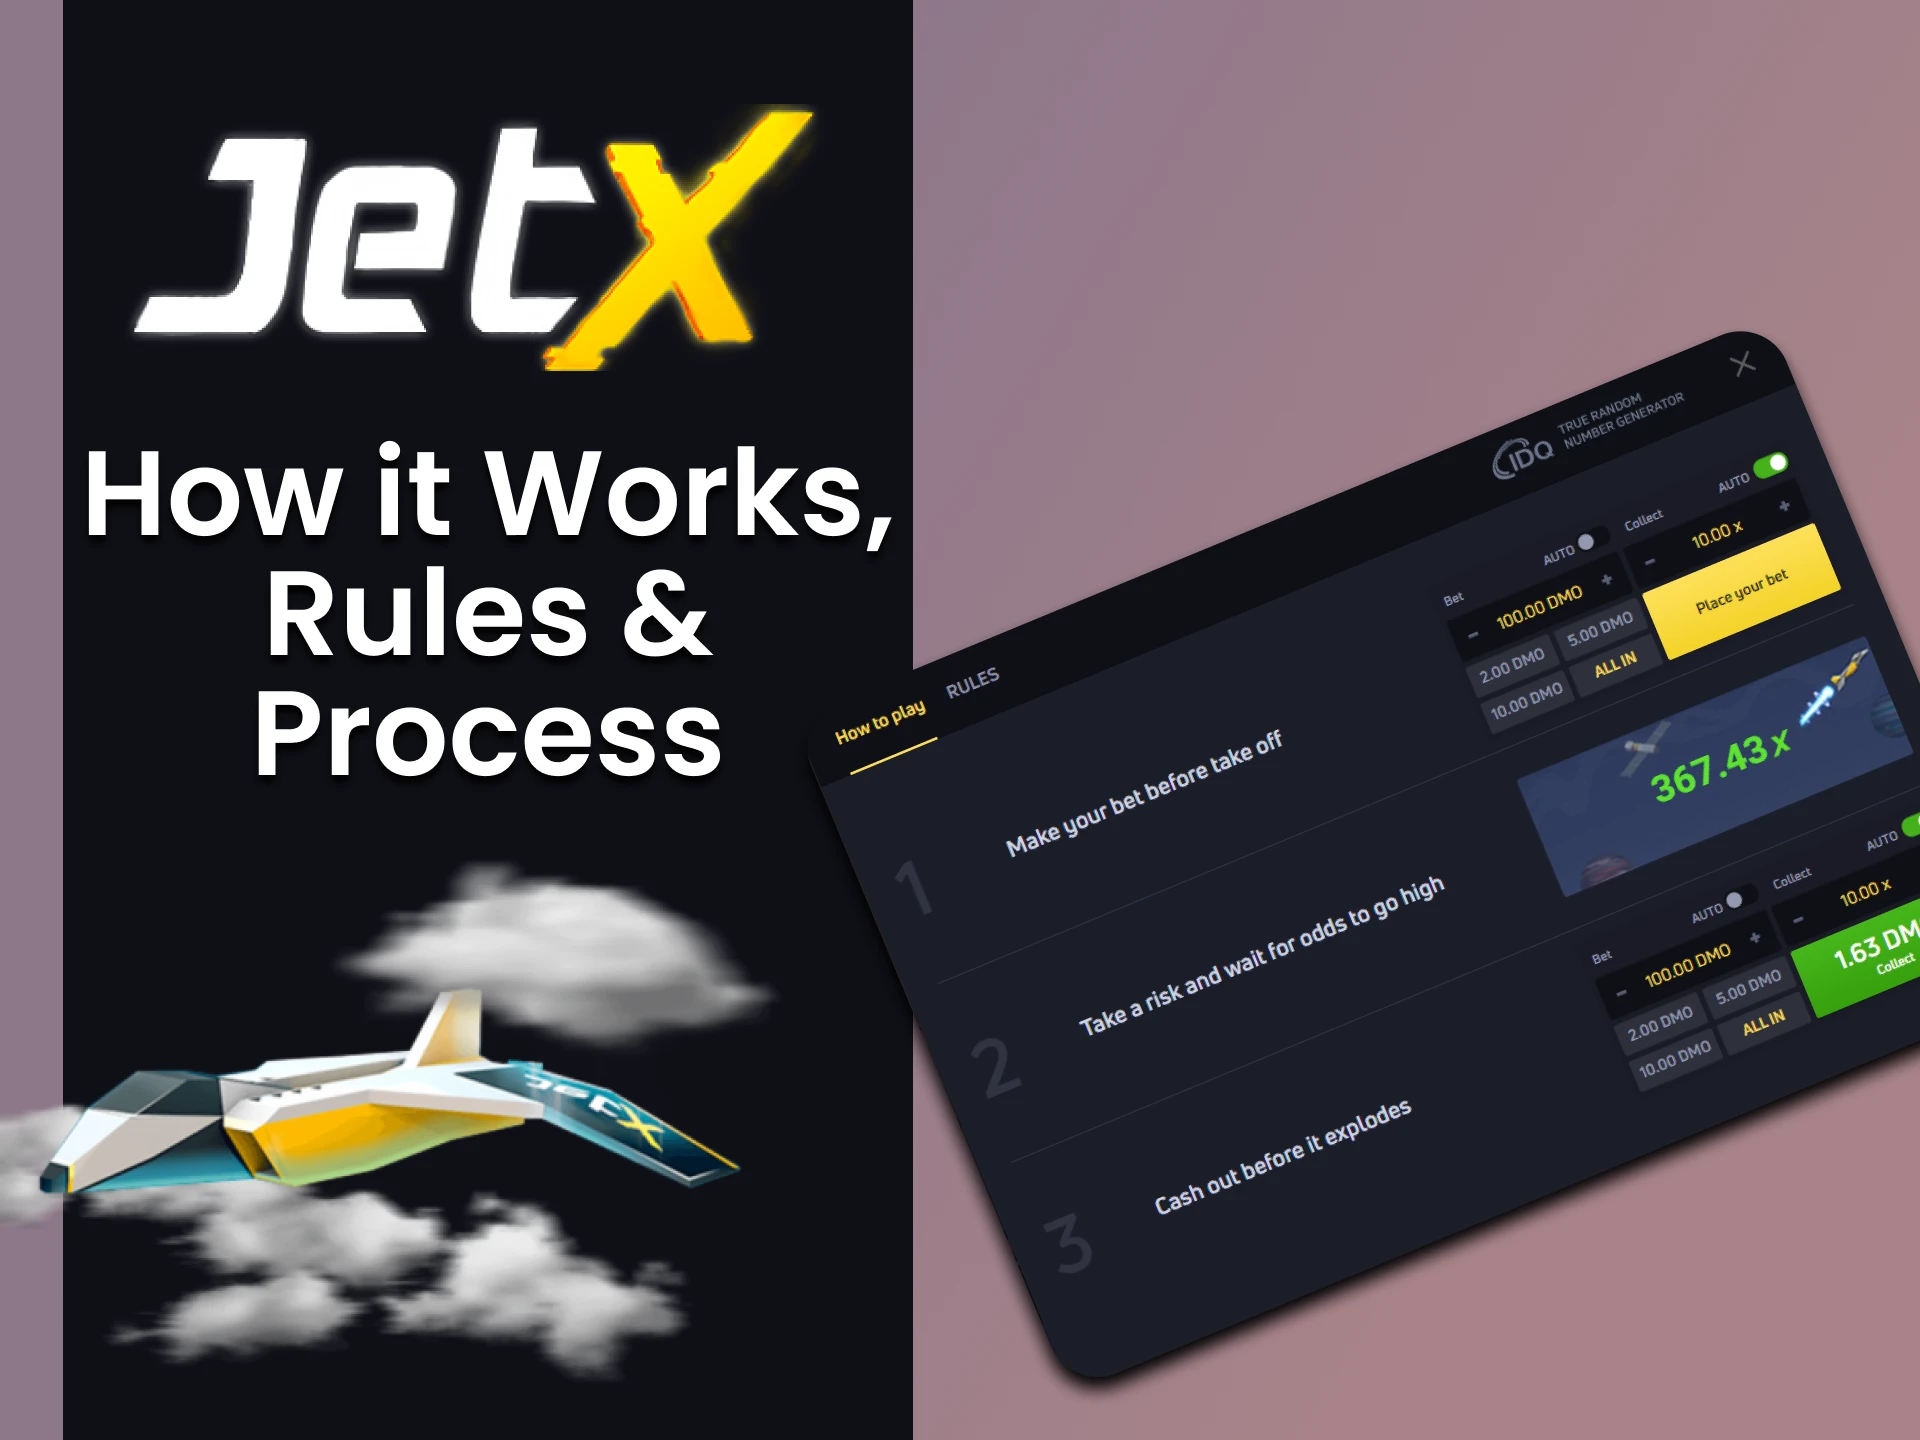 Learn the rules and process of playing JetX.